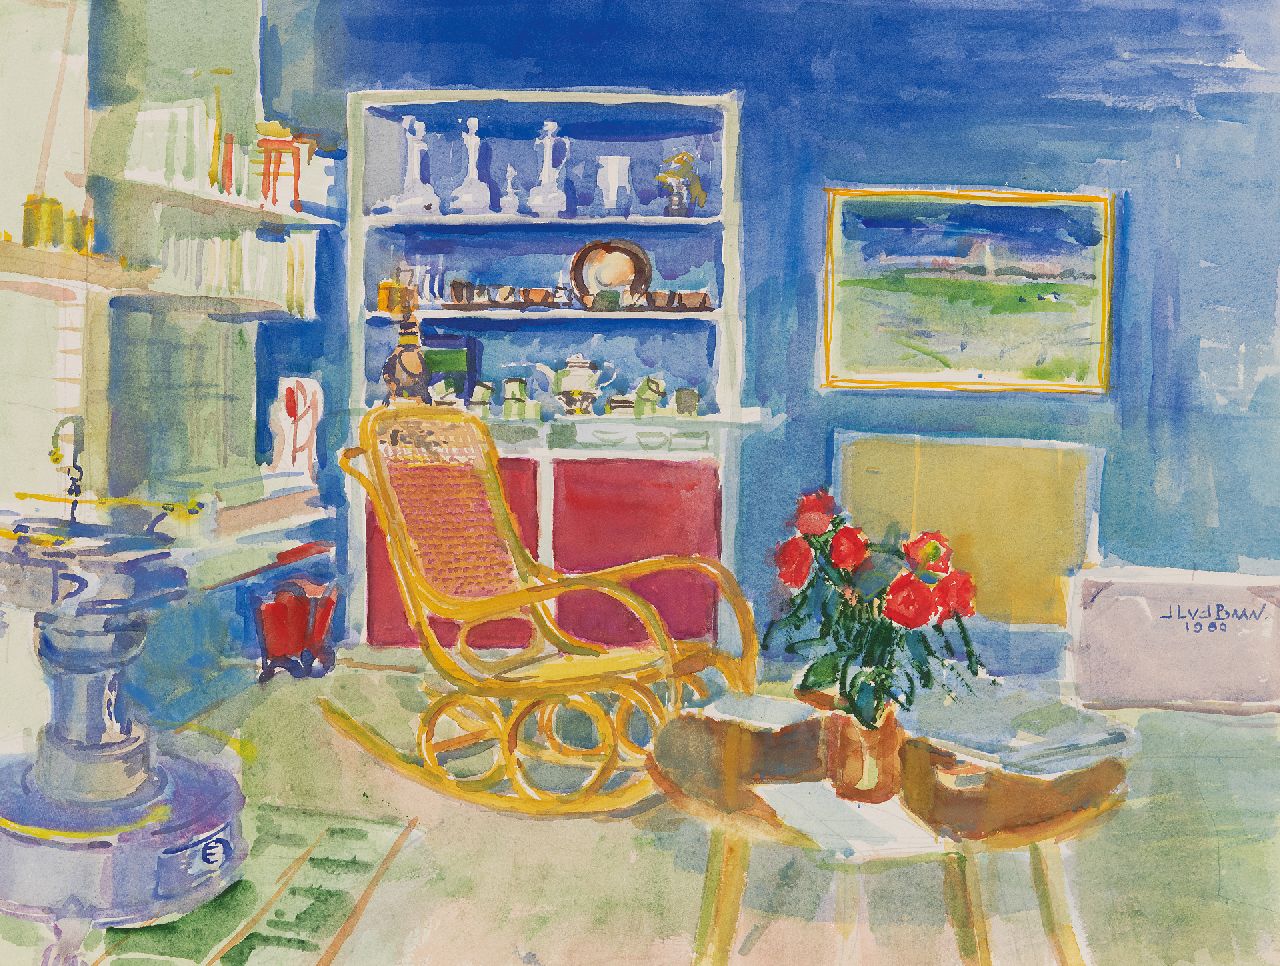 Baan J.L. van der | 'Jan' Lucas van der Baan | Watercolours and drawings offered for sale | Interior, watercolour on paper 47.0 x 62.5 cm, signed m.r. and dated 1980